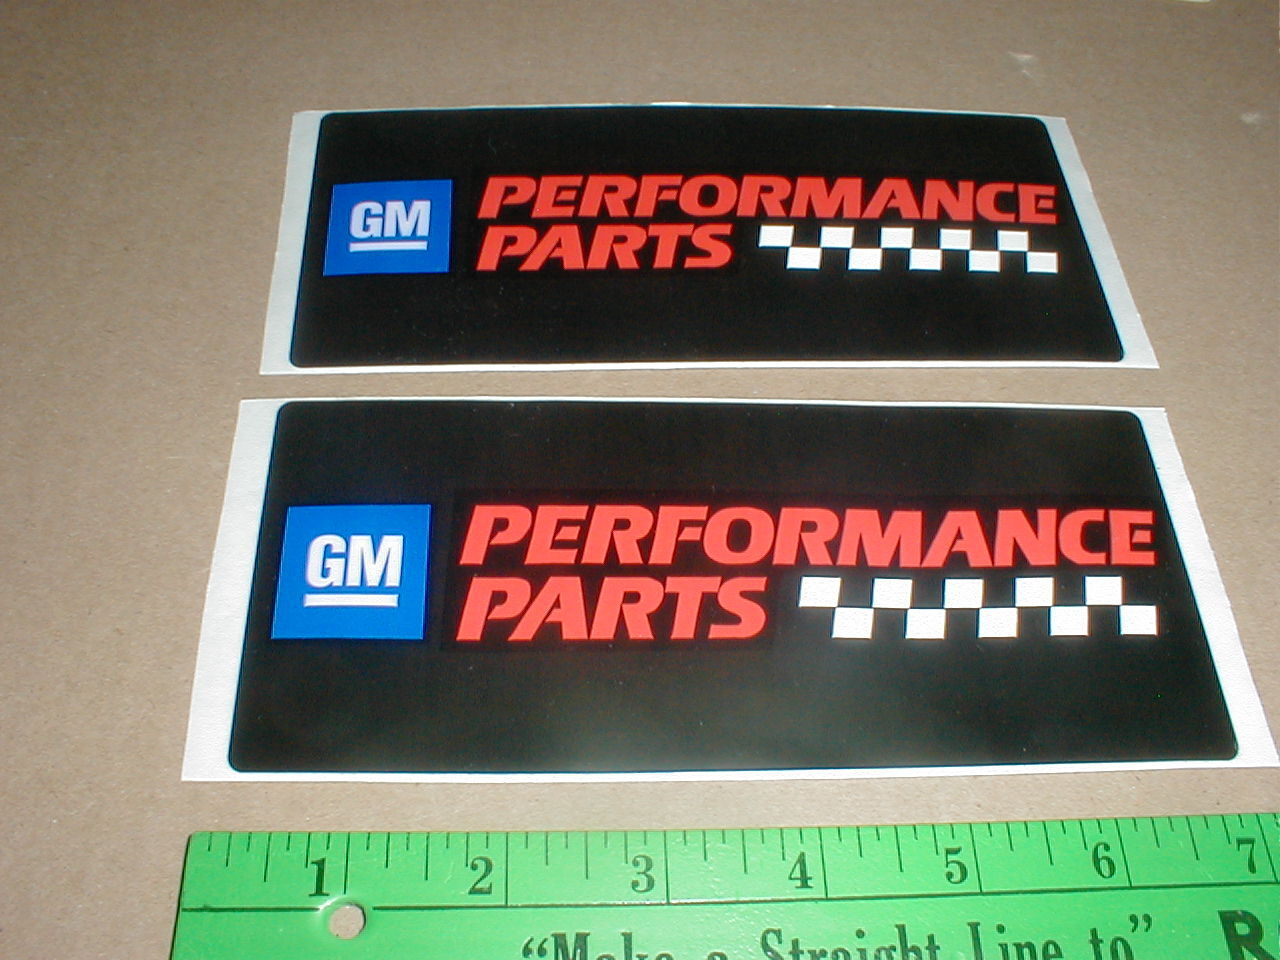 2 GM General Motors NOS new Performance Parts decal sticker AC delco goodwrench Без бренда